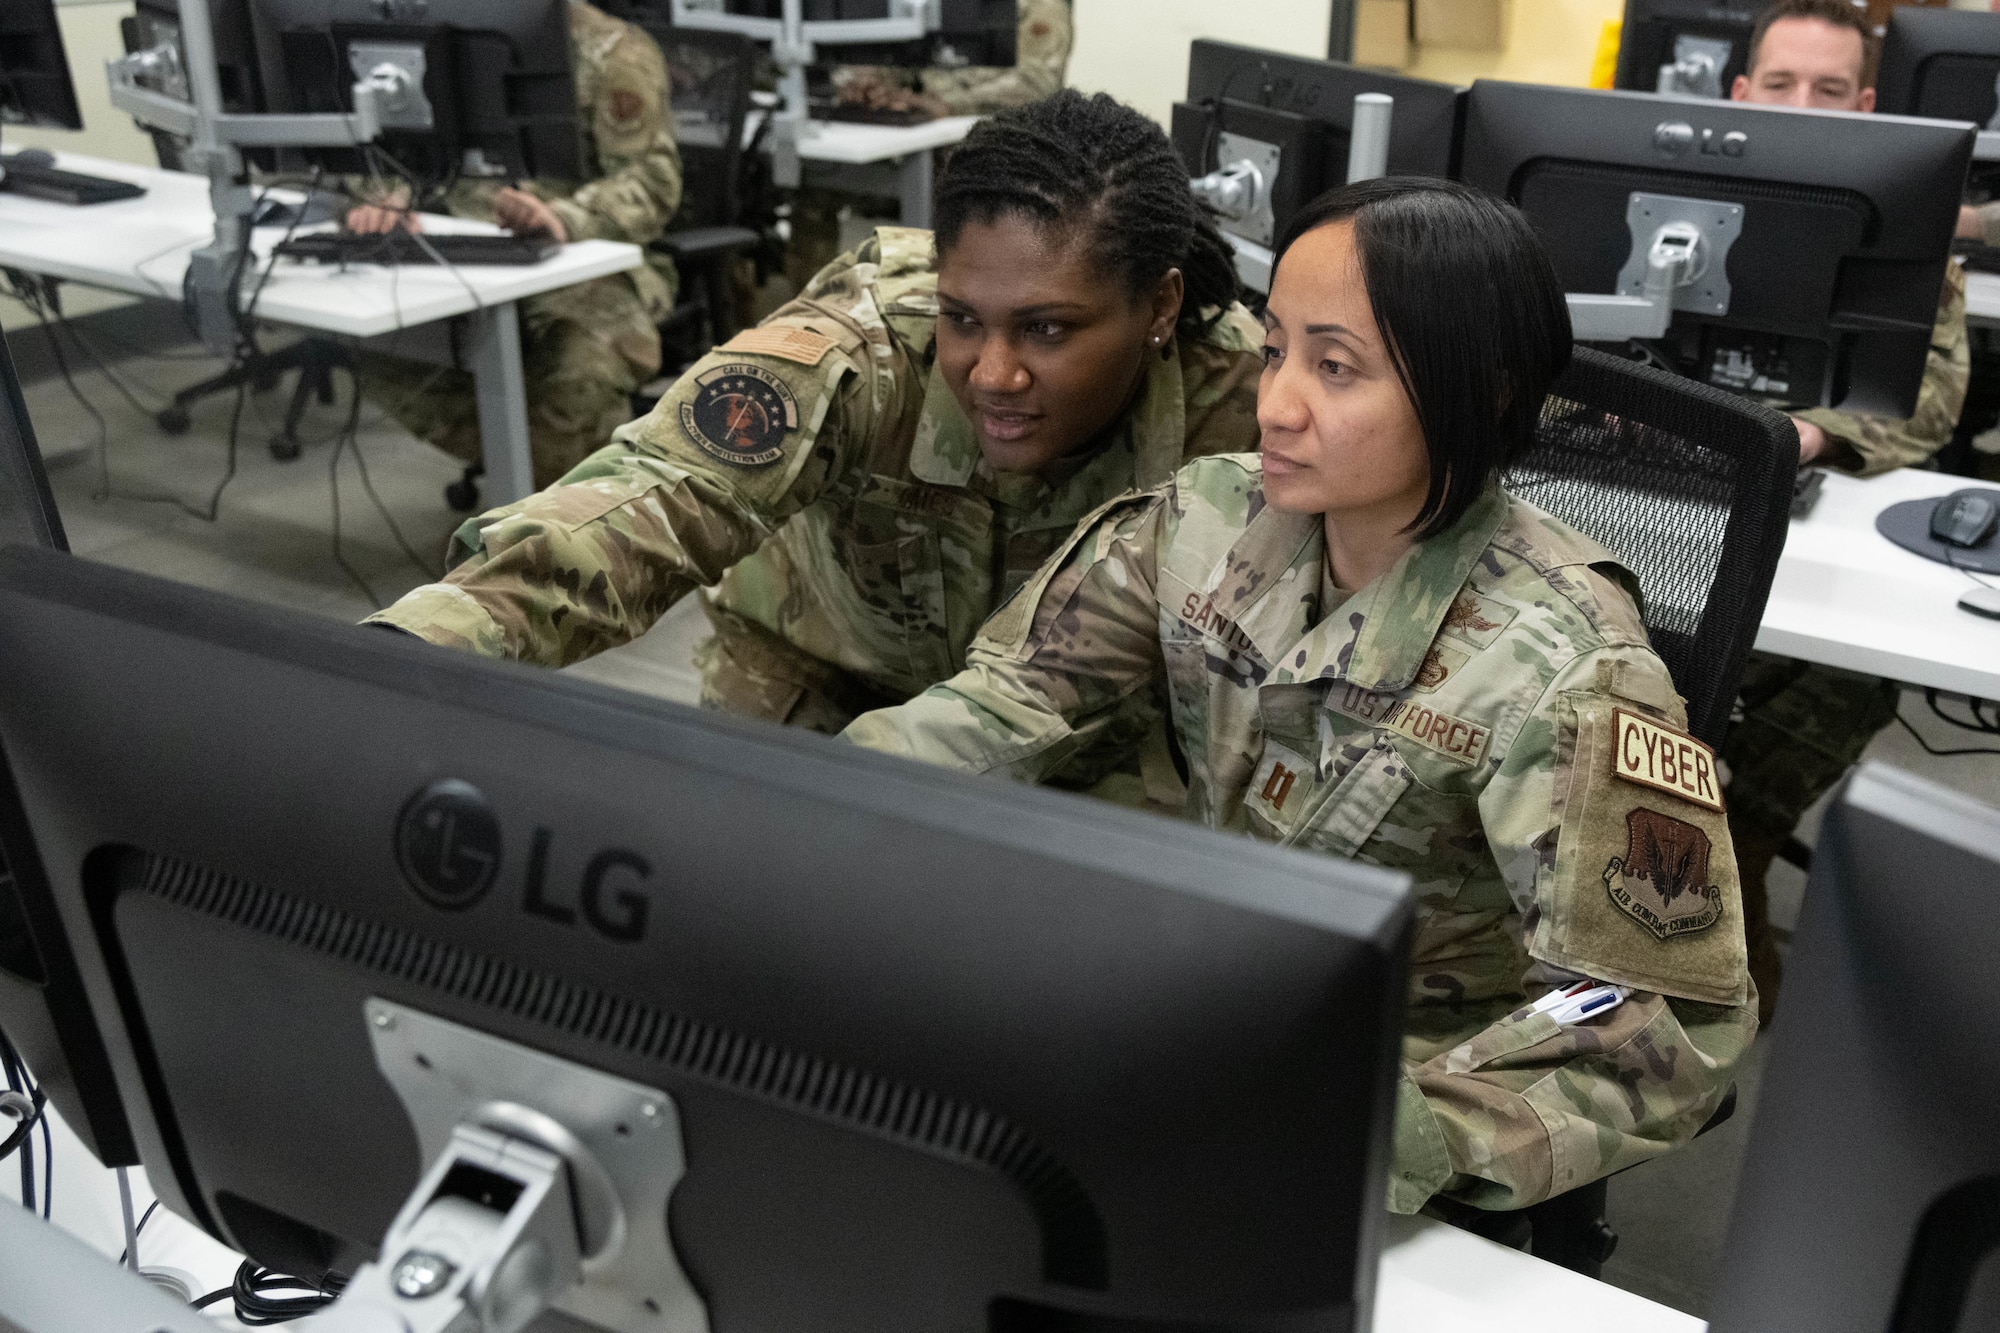 Airmen assigned to the 275th Cyberspace Operations Squadron work at a computer terminal at Warfield Air National Guard Base at Martin State Airport, Middle River, Md., on January 10, 2023.